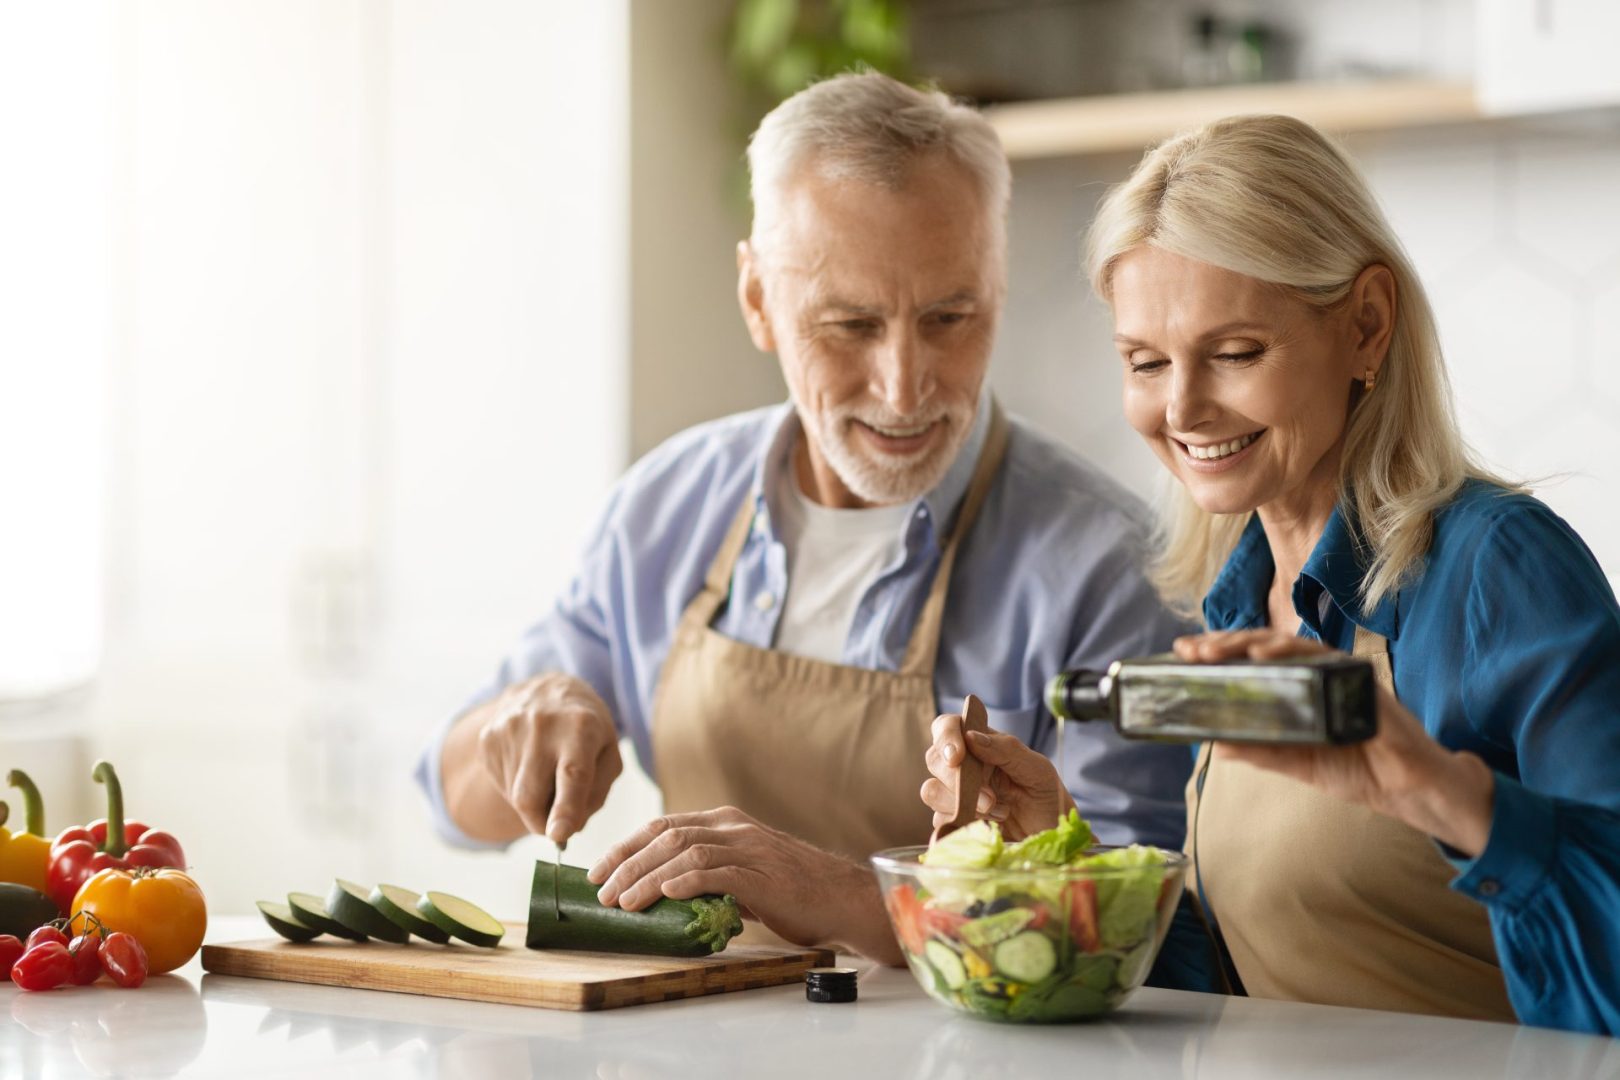 Happy Senior Couple Preparing Tasty Lunch Together In Kitchen, Smiling Mature Man And Woman Cooking Healthy Vegetarian Meal At Home, Woman Adding Oil To Fresh Vegetable Salad, Free Space